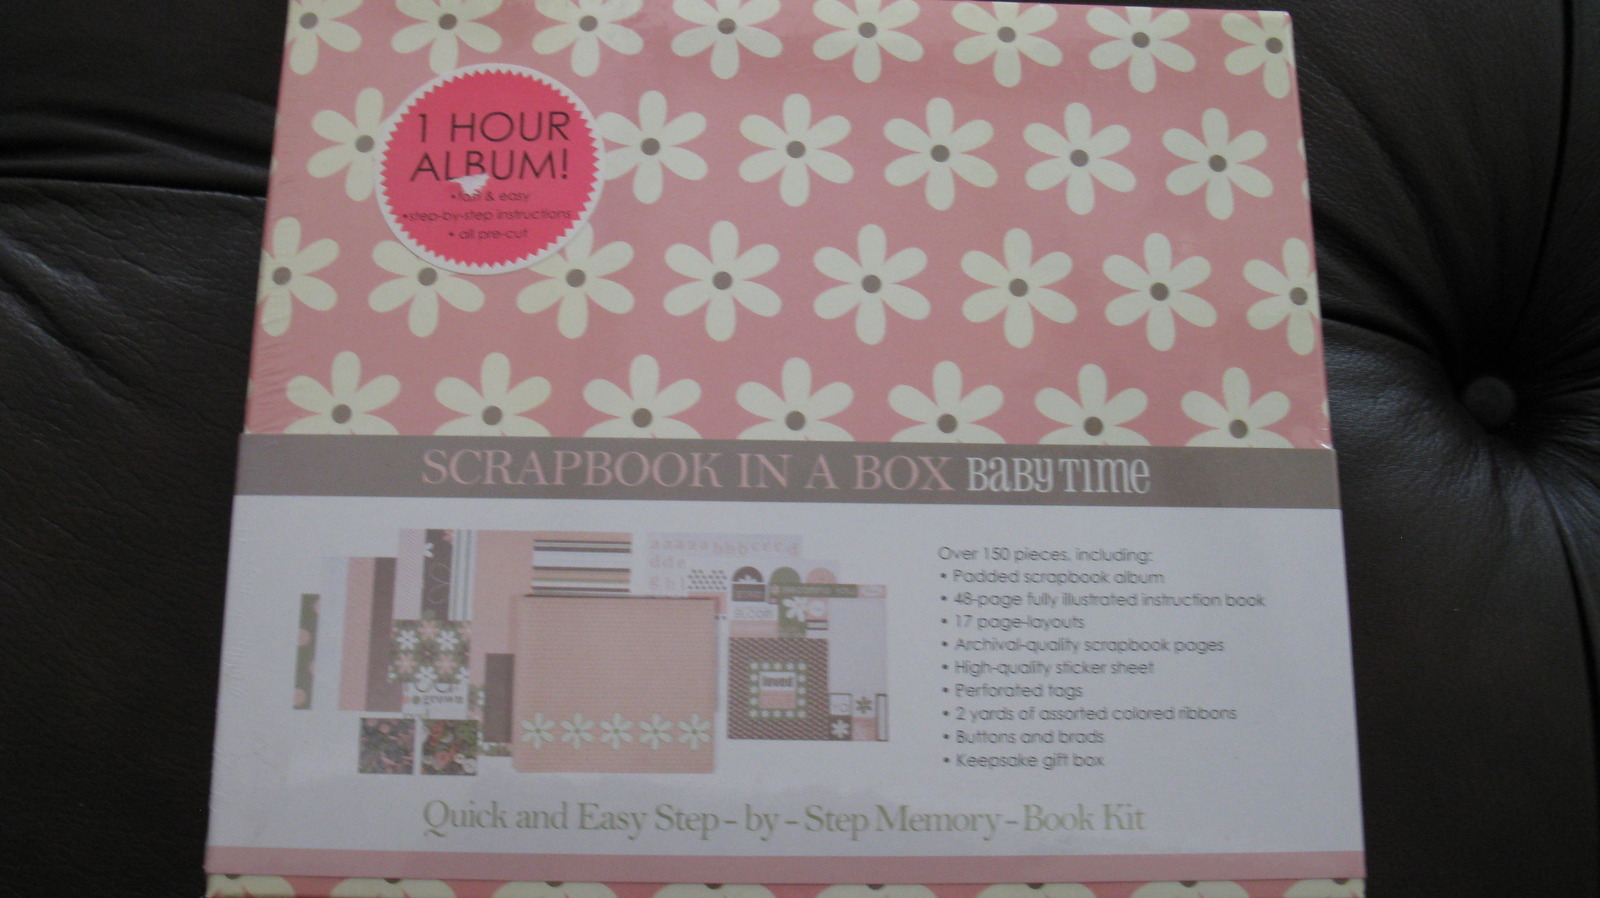 Scrapbook in a Box Babytime Includes Over 150 Pieces - $34.99